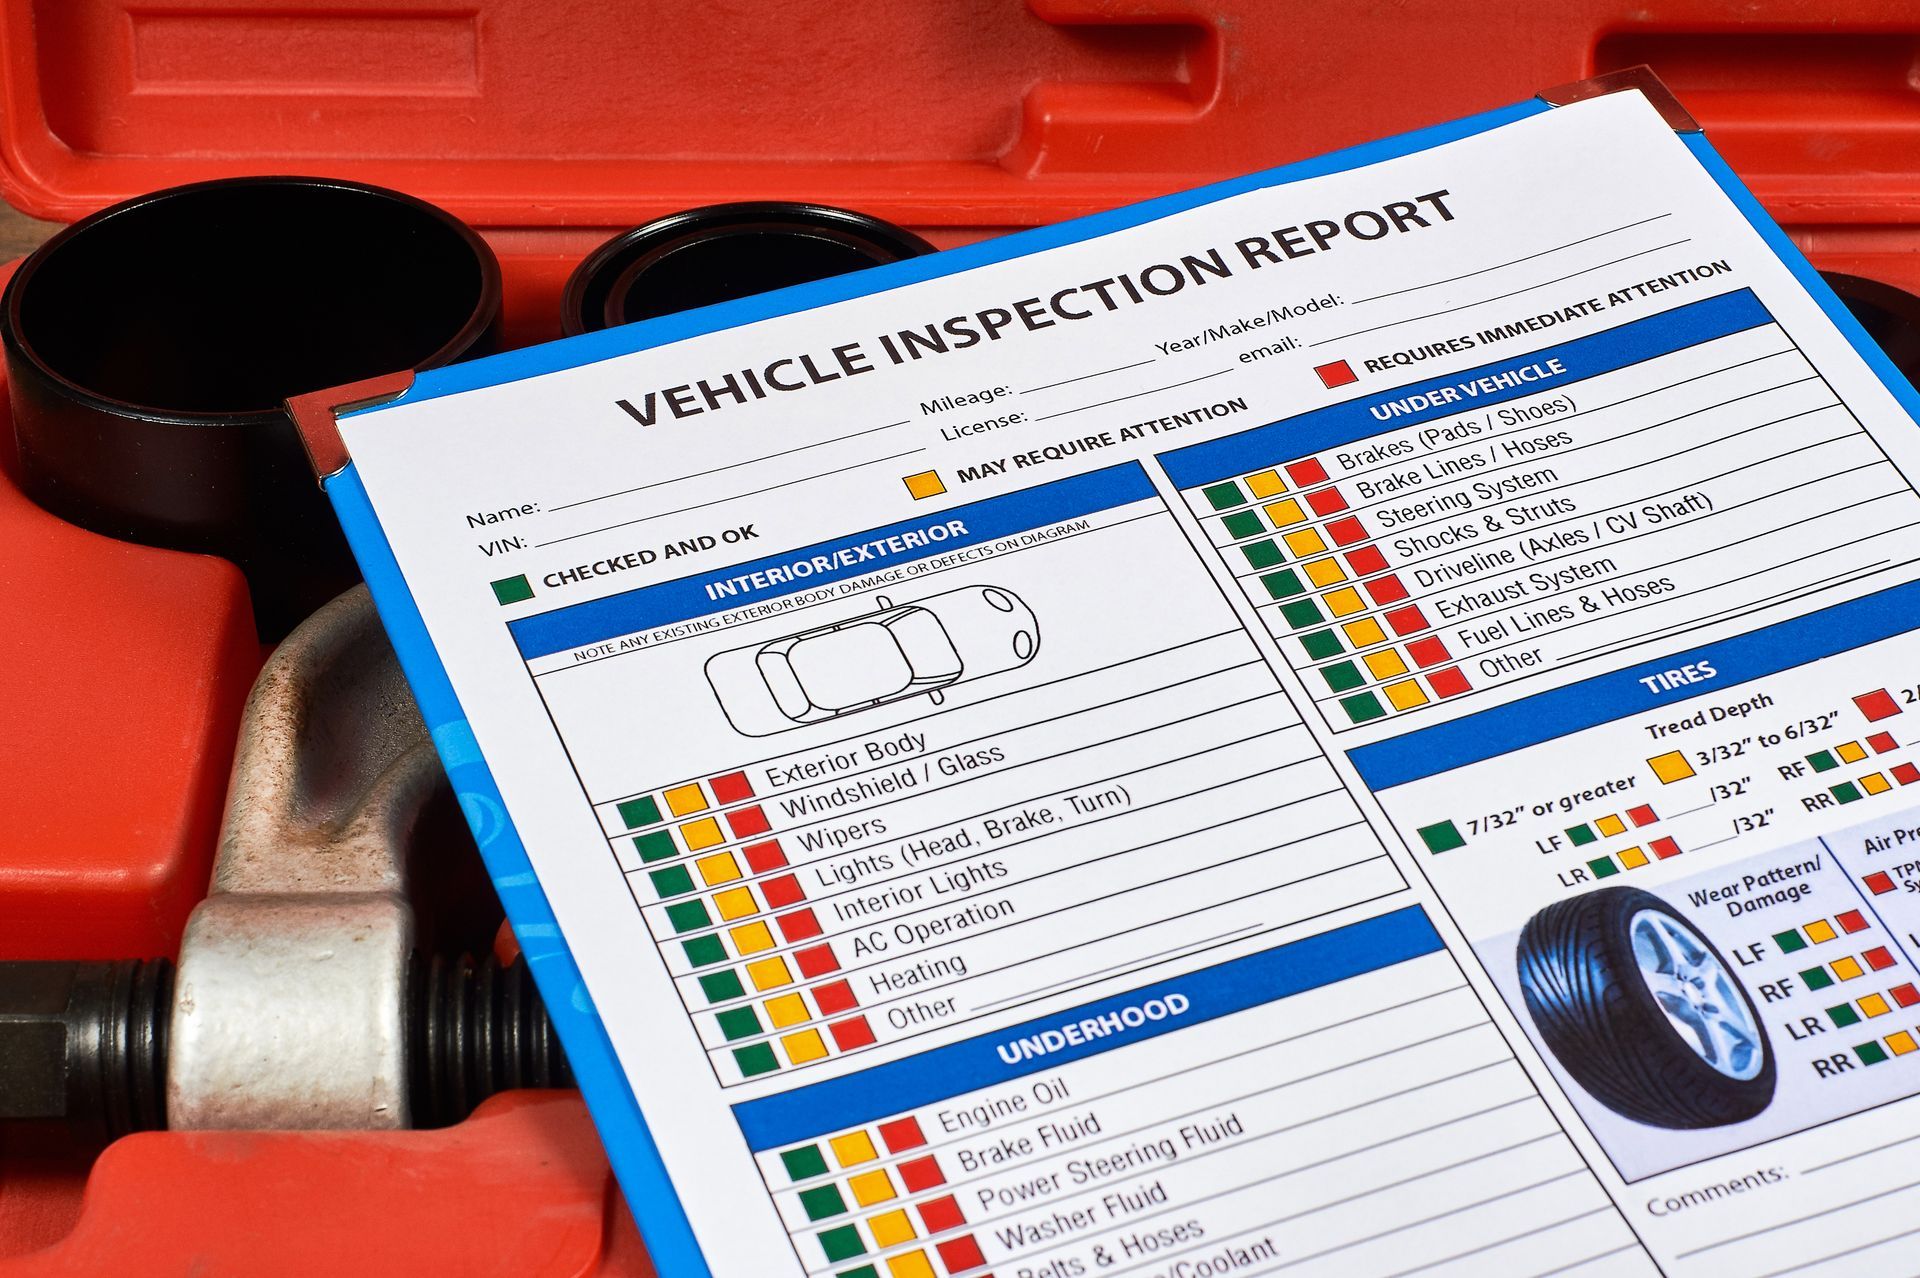 Everything You Need to Know About The New York Vehicle Inspection | Precision Automotive Service NY